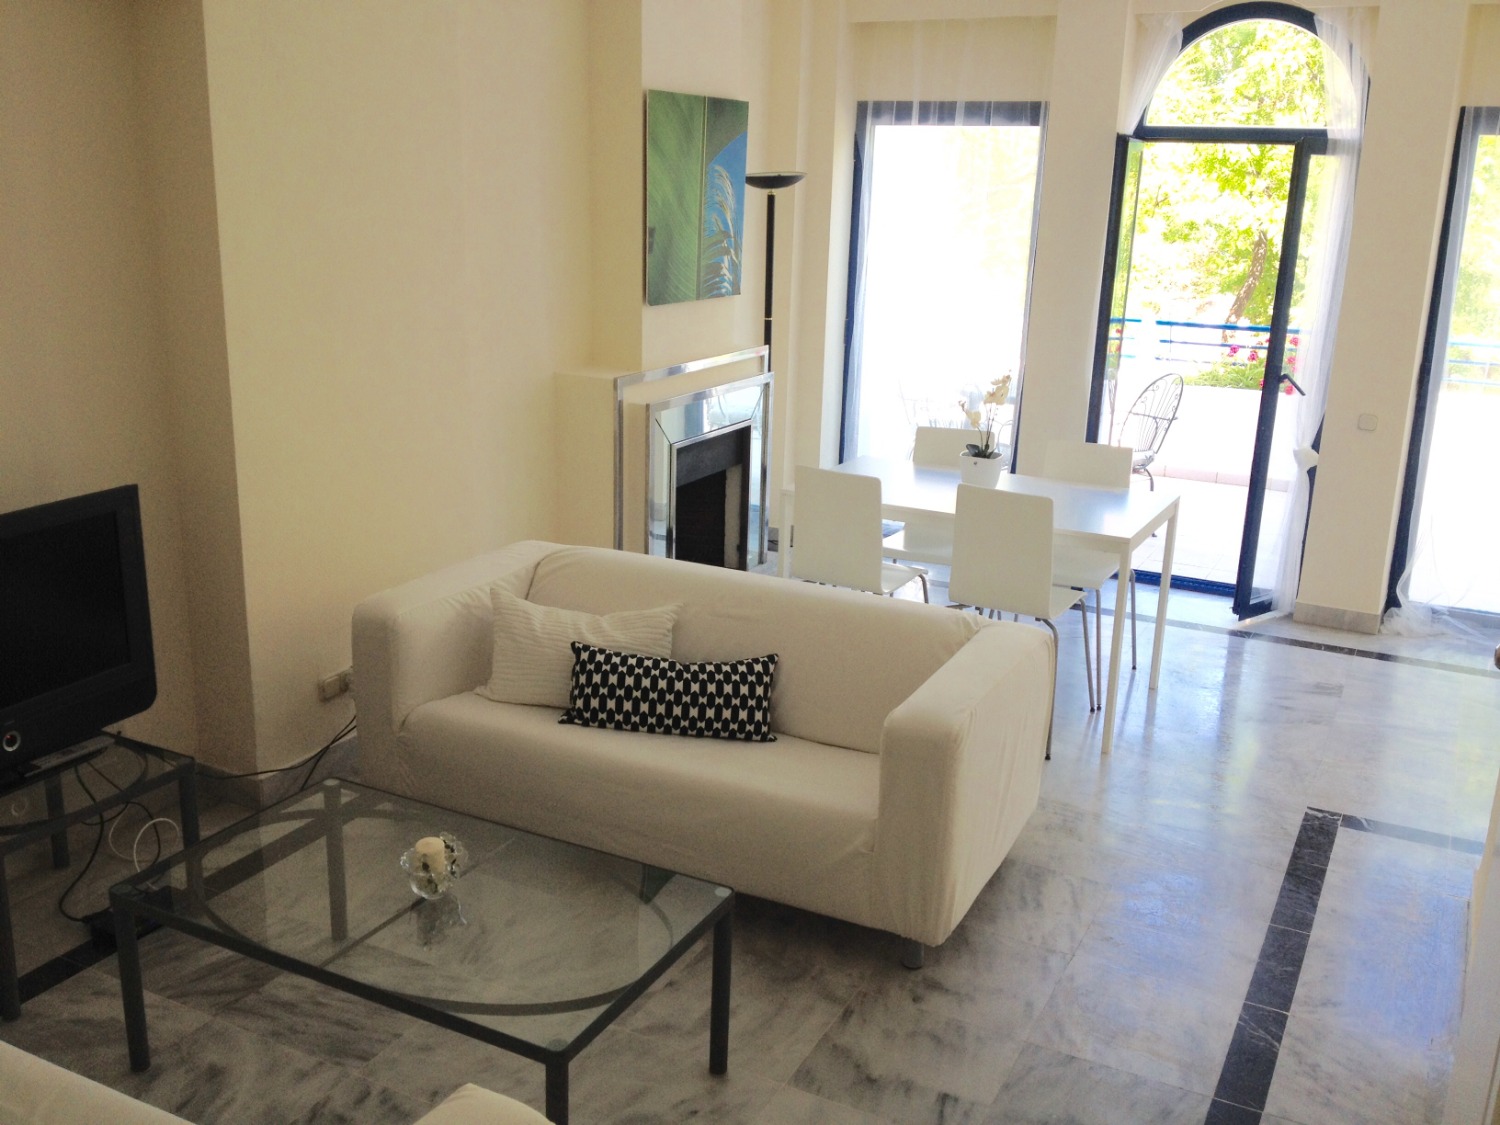 Rent. Duplex with 2 bedrooms. 1 minute walk from the beach. Marbella.